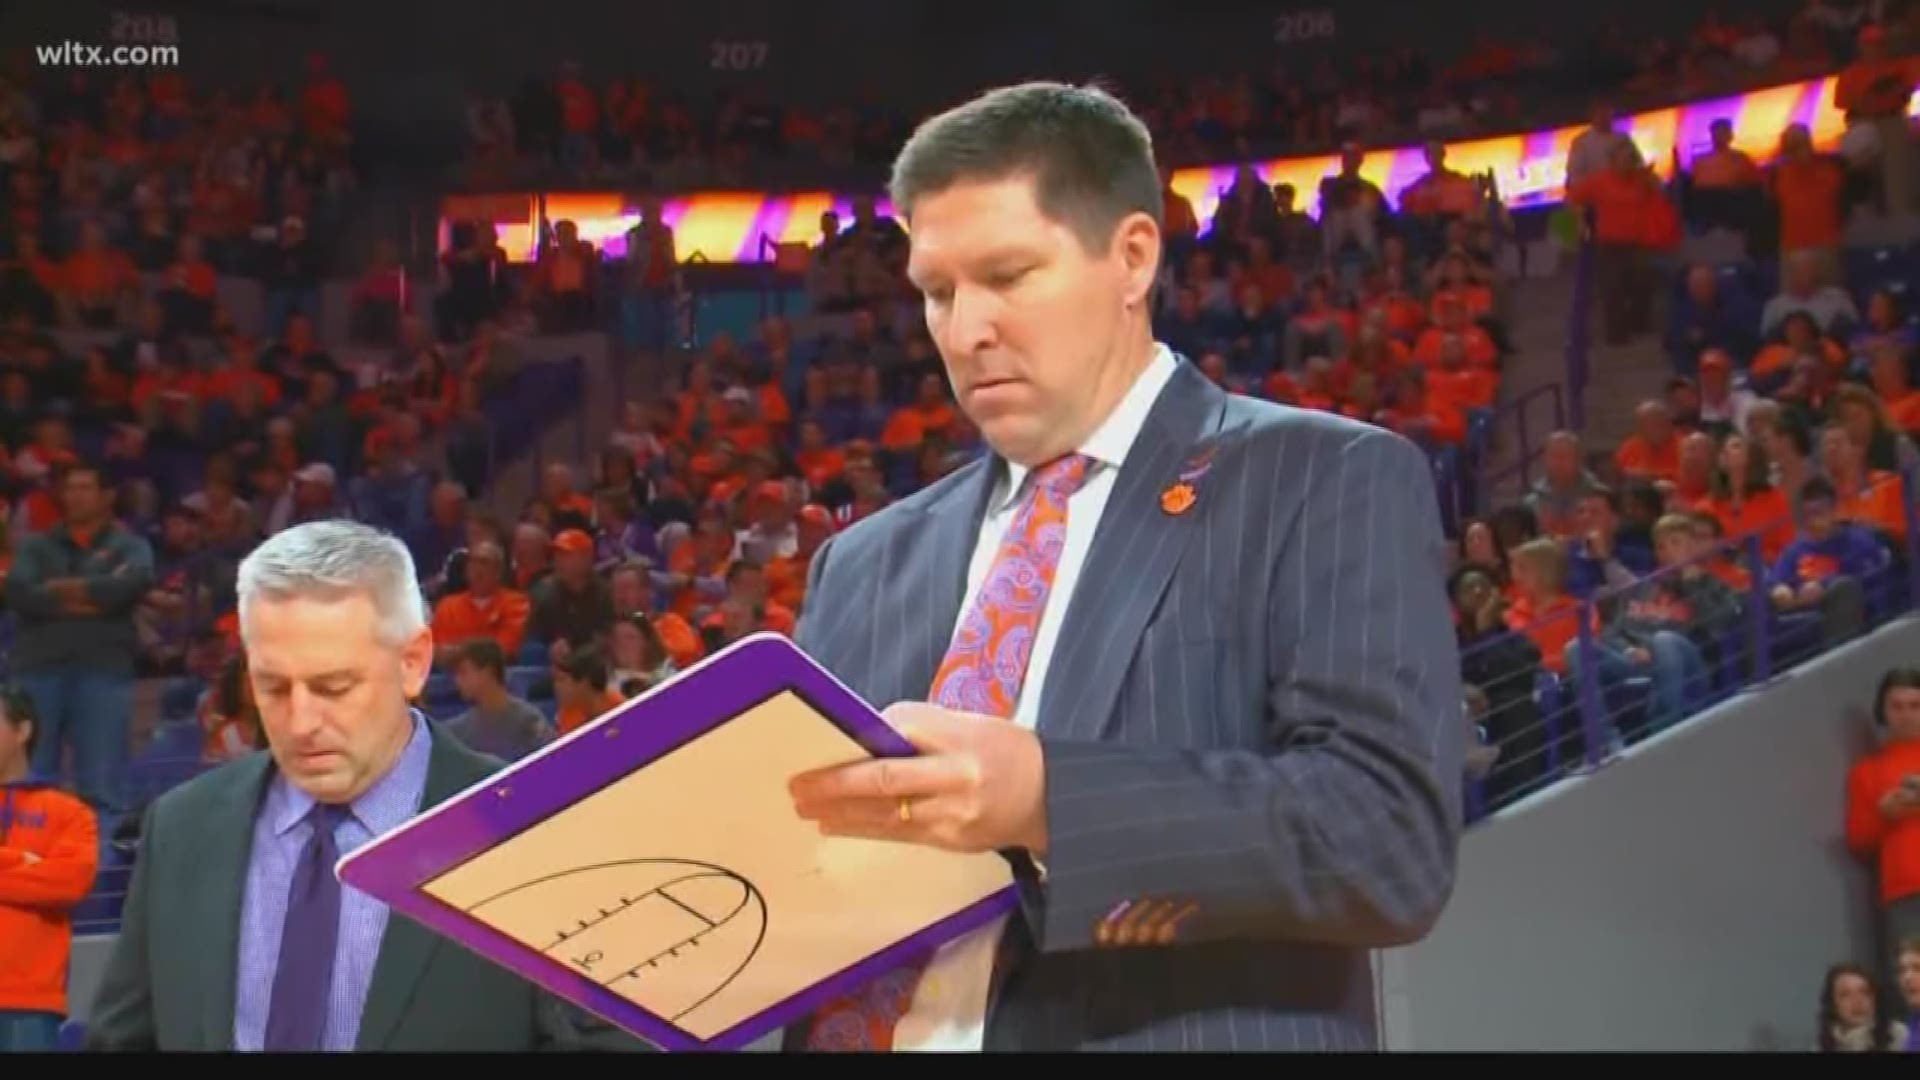 Clemson head basketball coach Brad Brownell has been rewarded with a new contract. Brownell led the Tigers to their first Sweet 16 appearance since 1997.